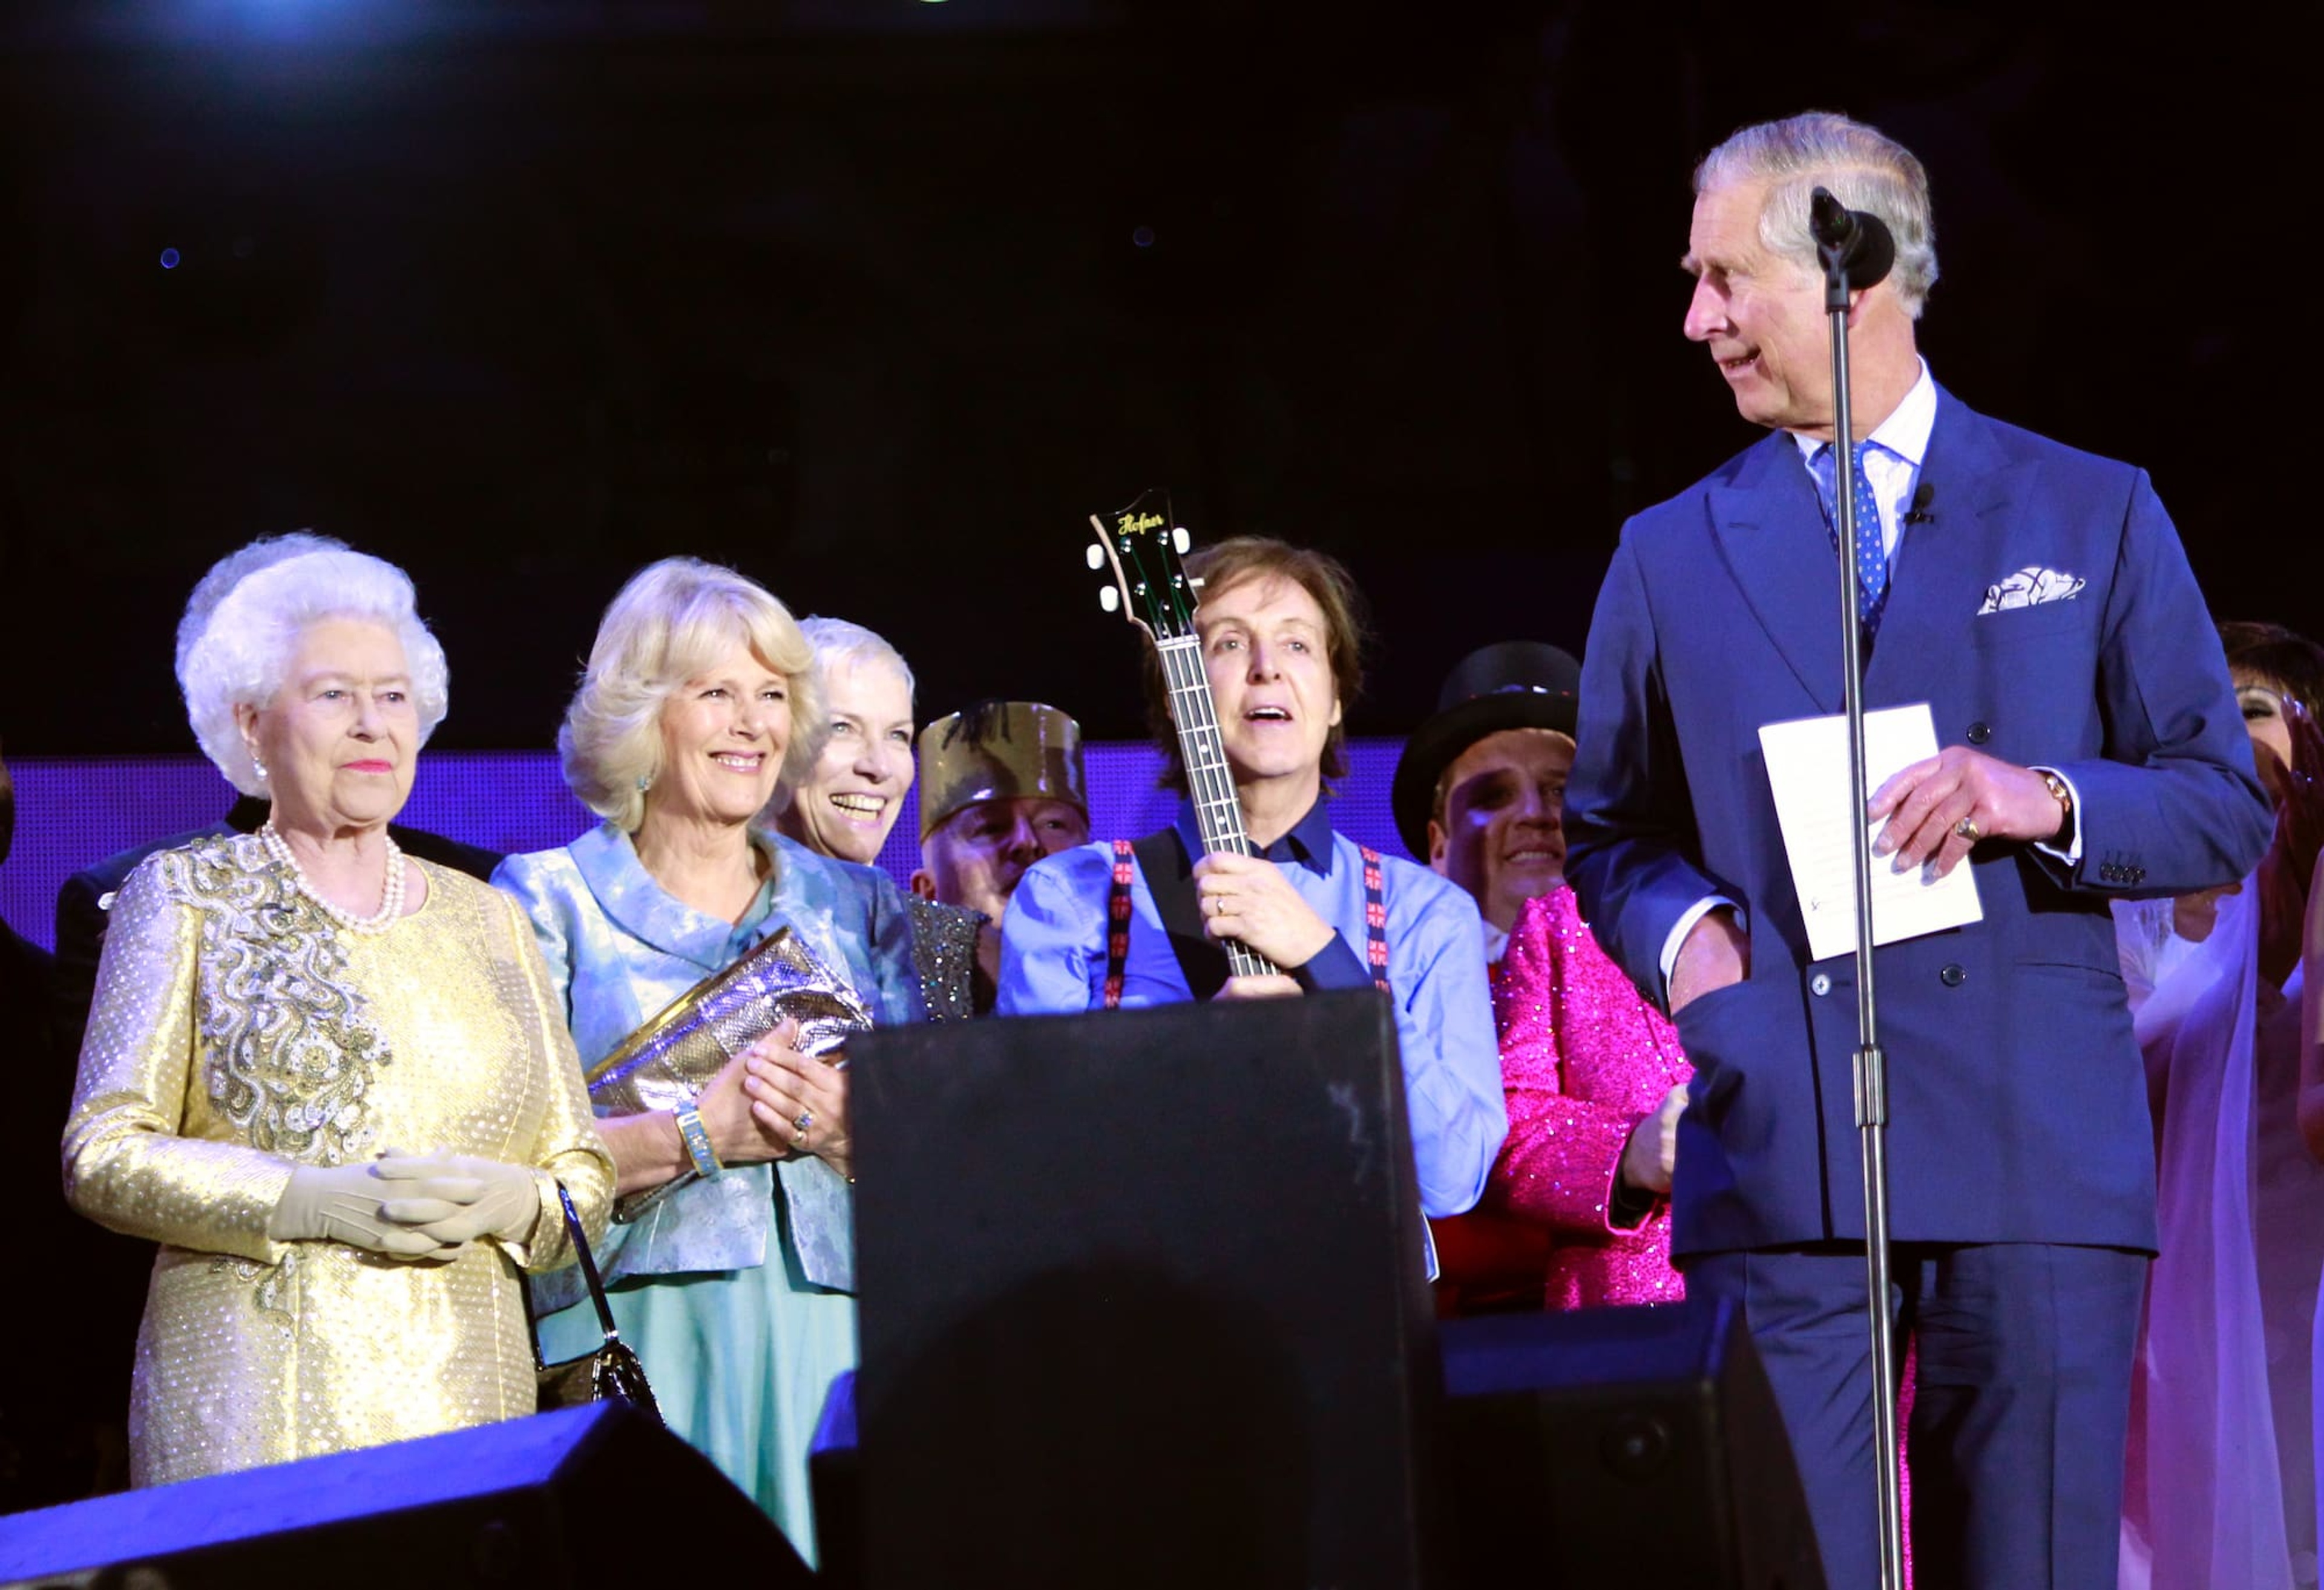 Photo of HRH Queen Elizabeth, Camilla Parker Bowles, Prince Charles and Paul McCartney on stage at the Diamond Jubilee concert 